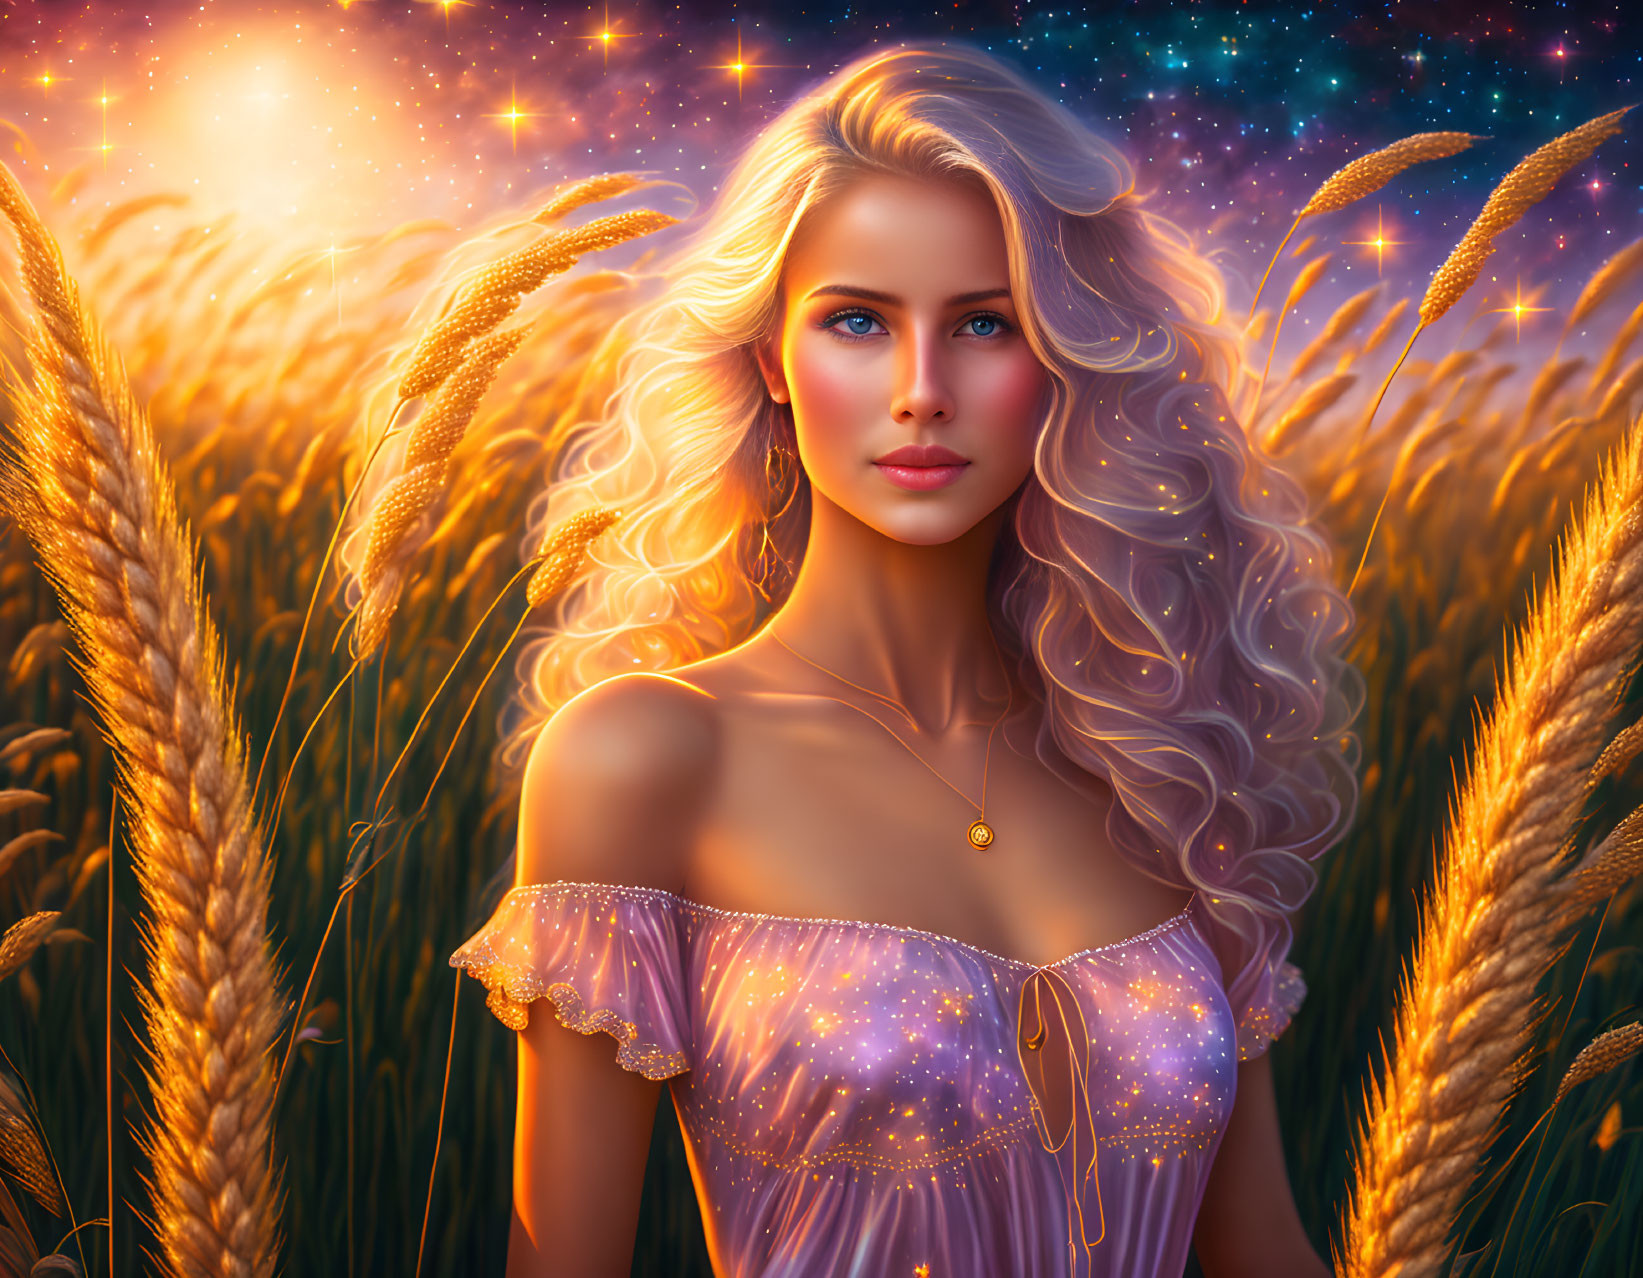 Among the Fields of Barley